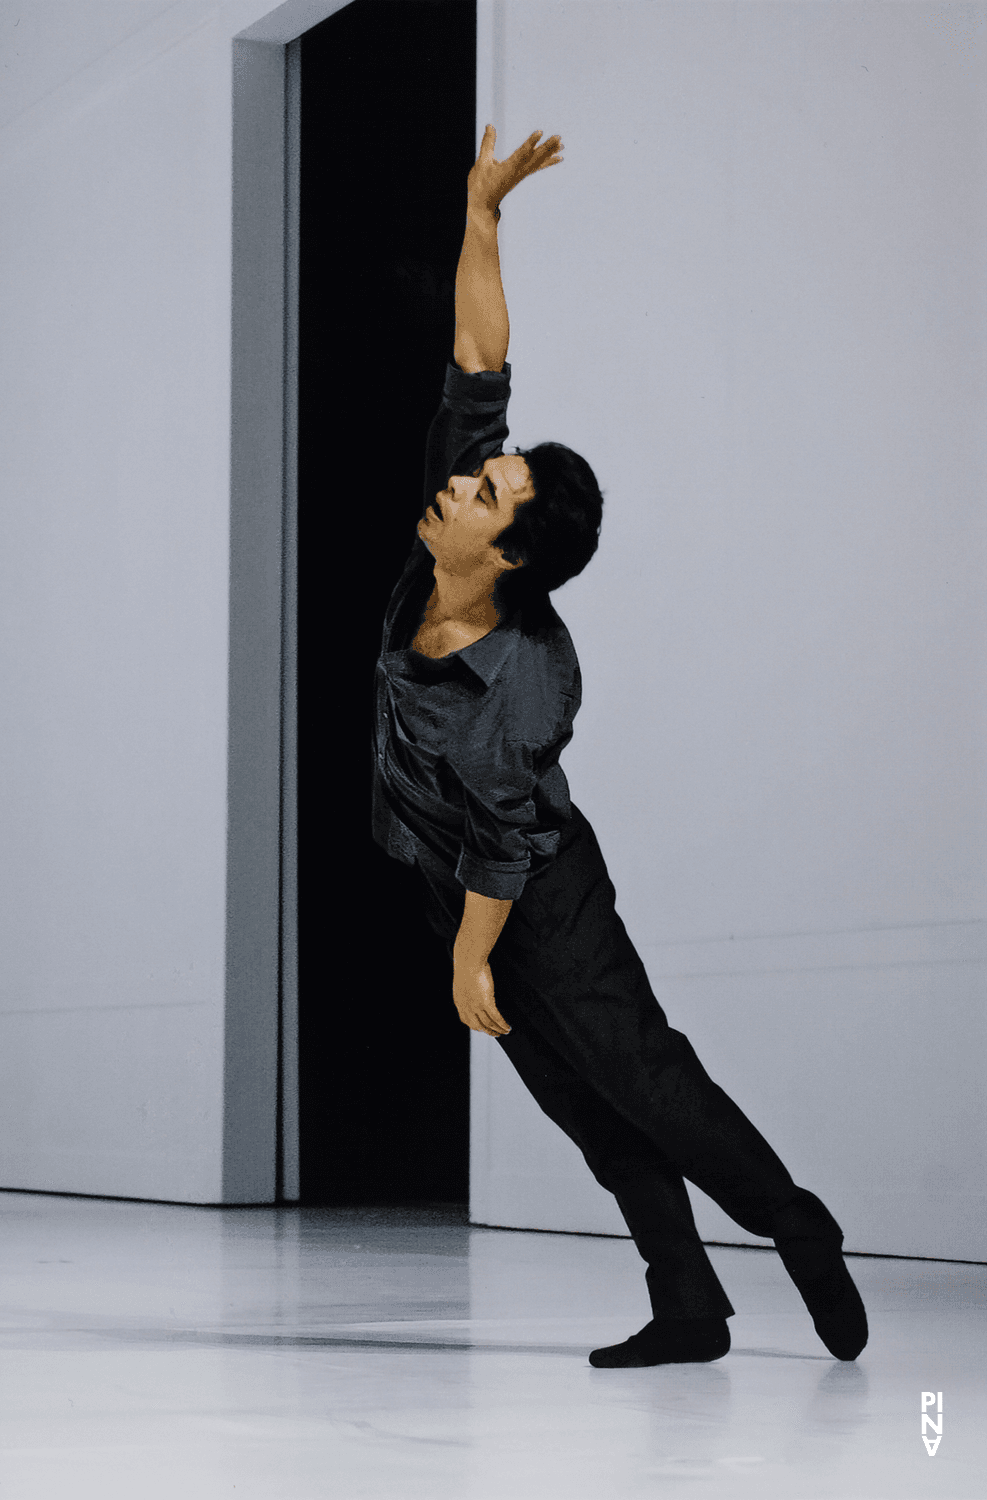 Kenji Takagi in “For the Children of Yesterday, Today and Tomorrow” by Pina Bausch